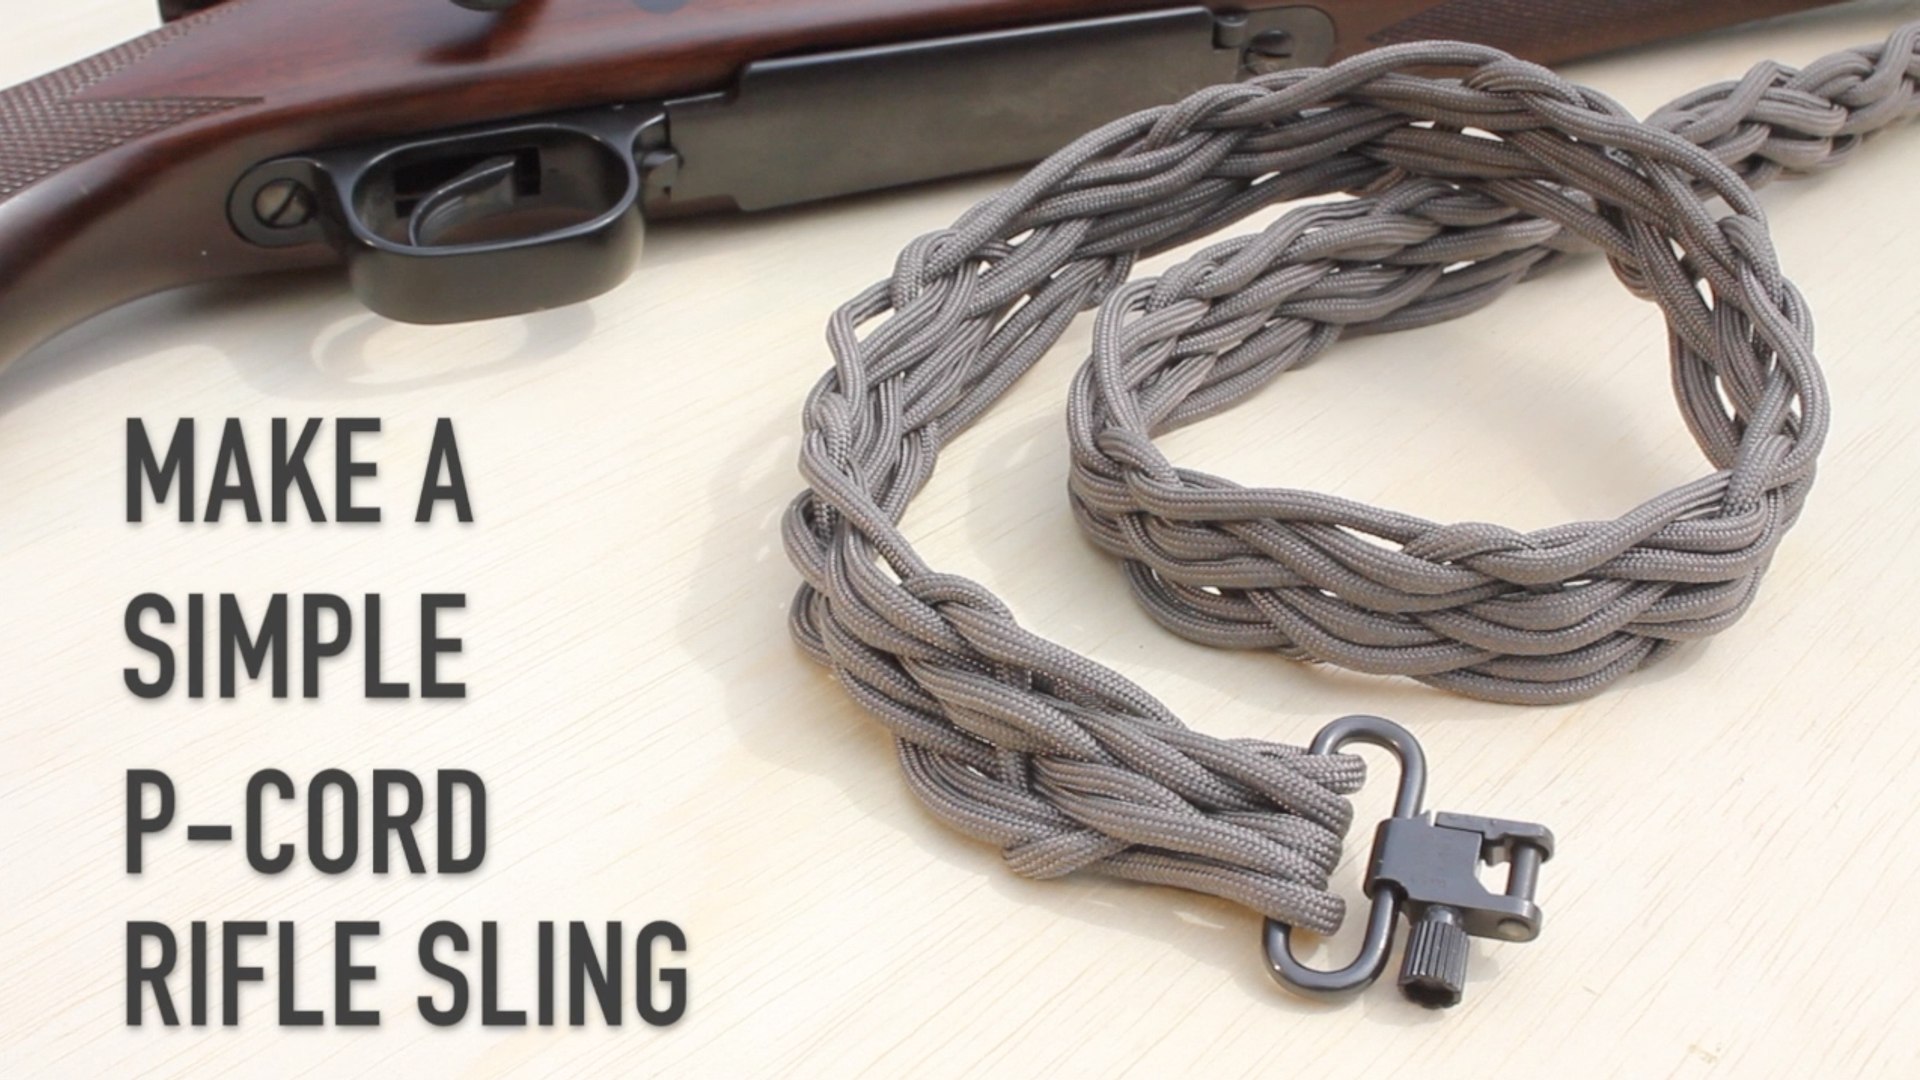 DIY: How to Make a P-Cord Rifle Sling - video Dailymotion